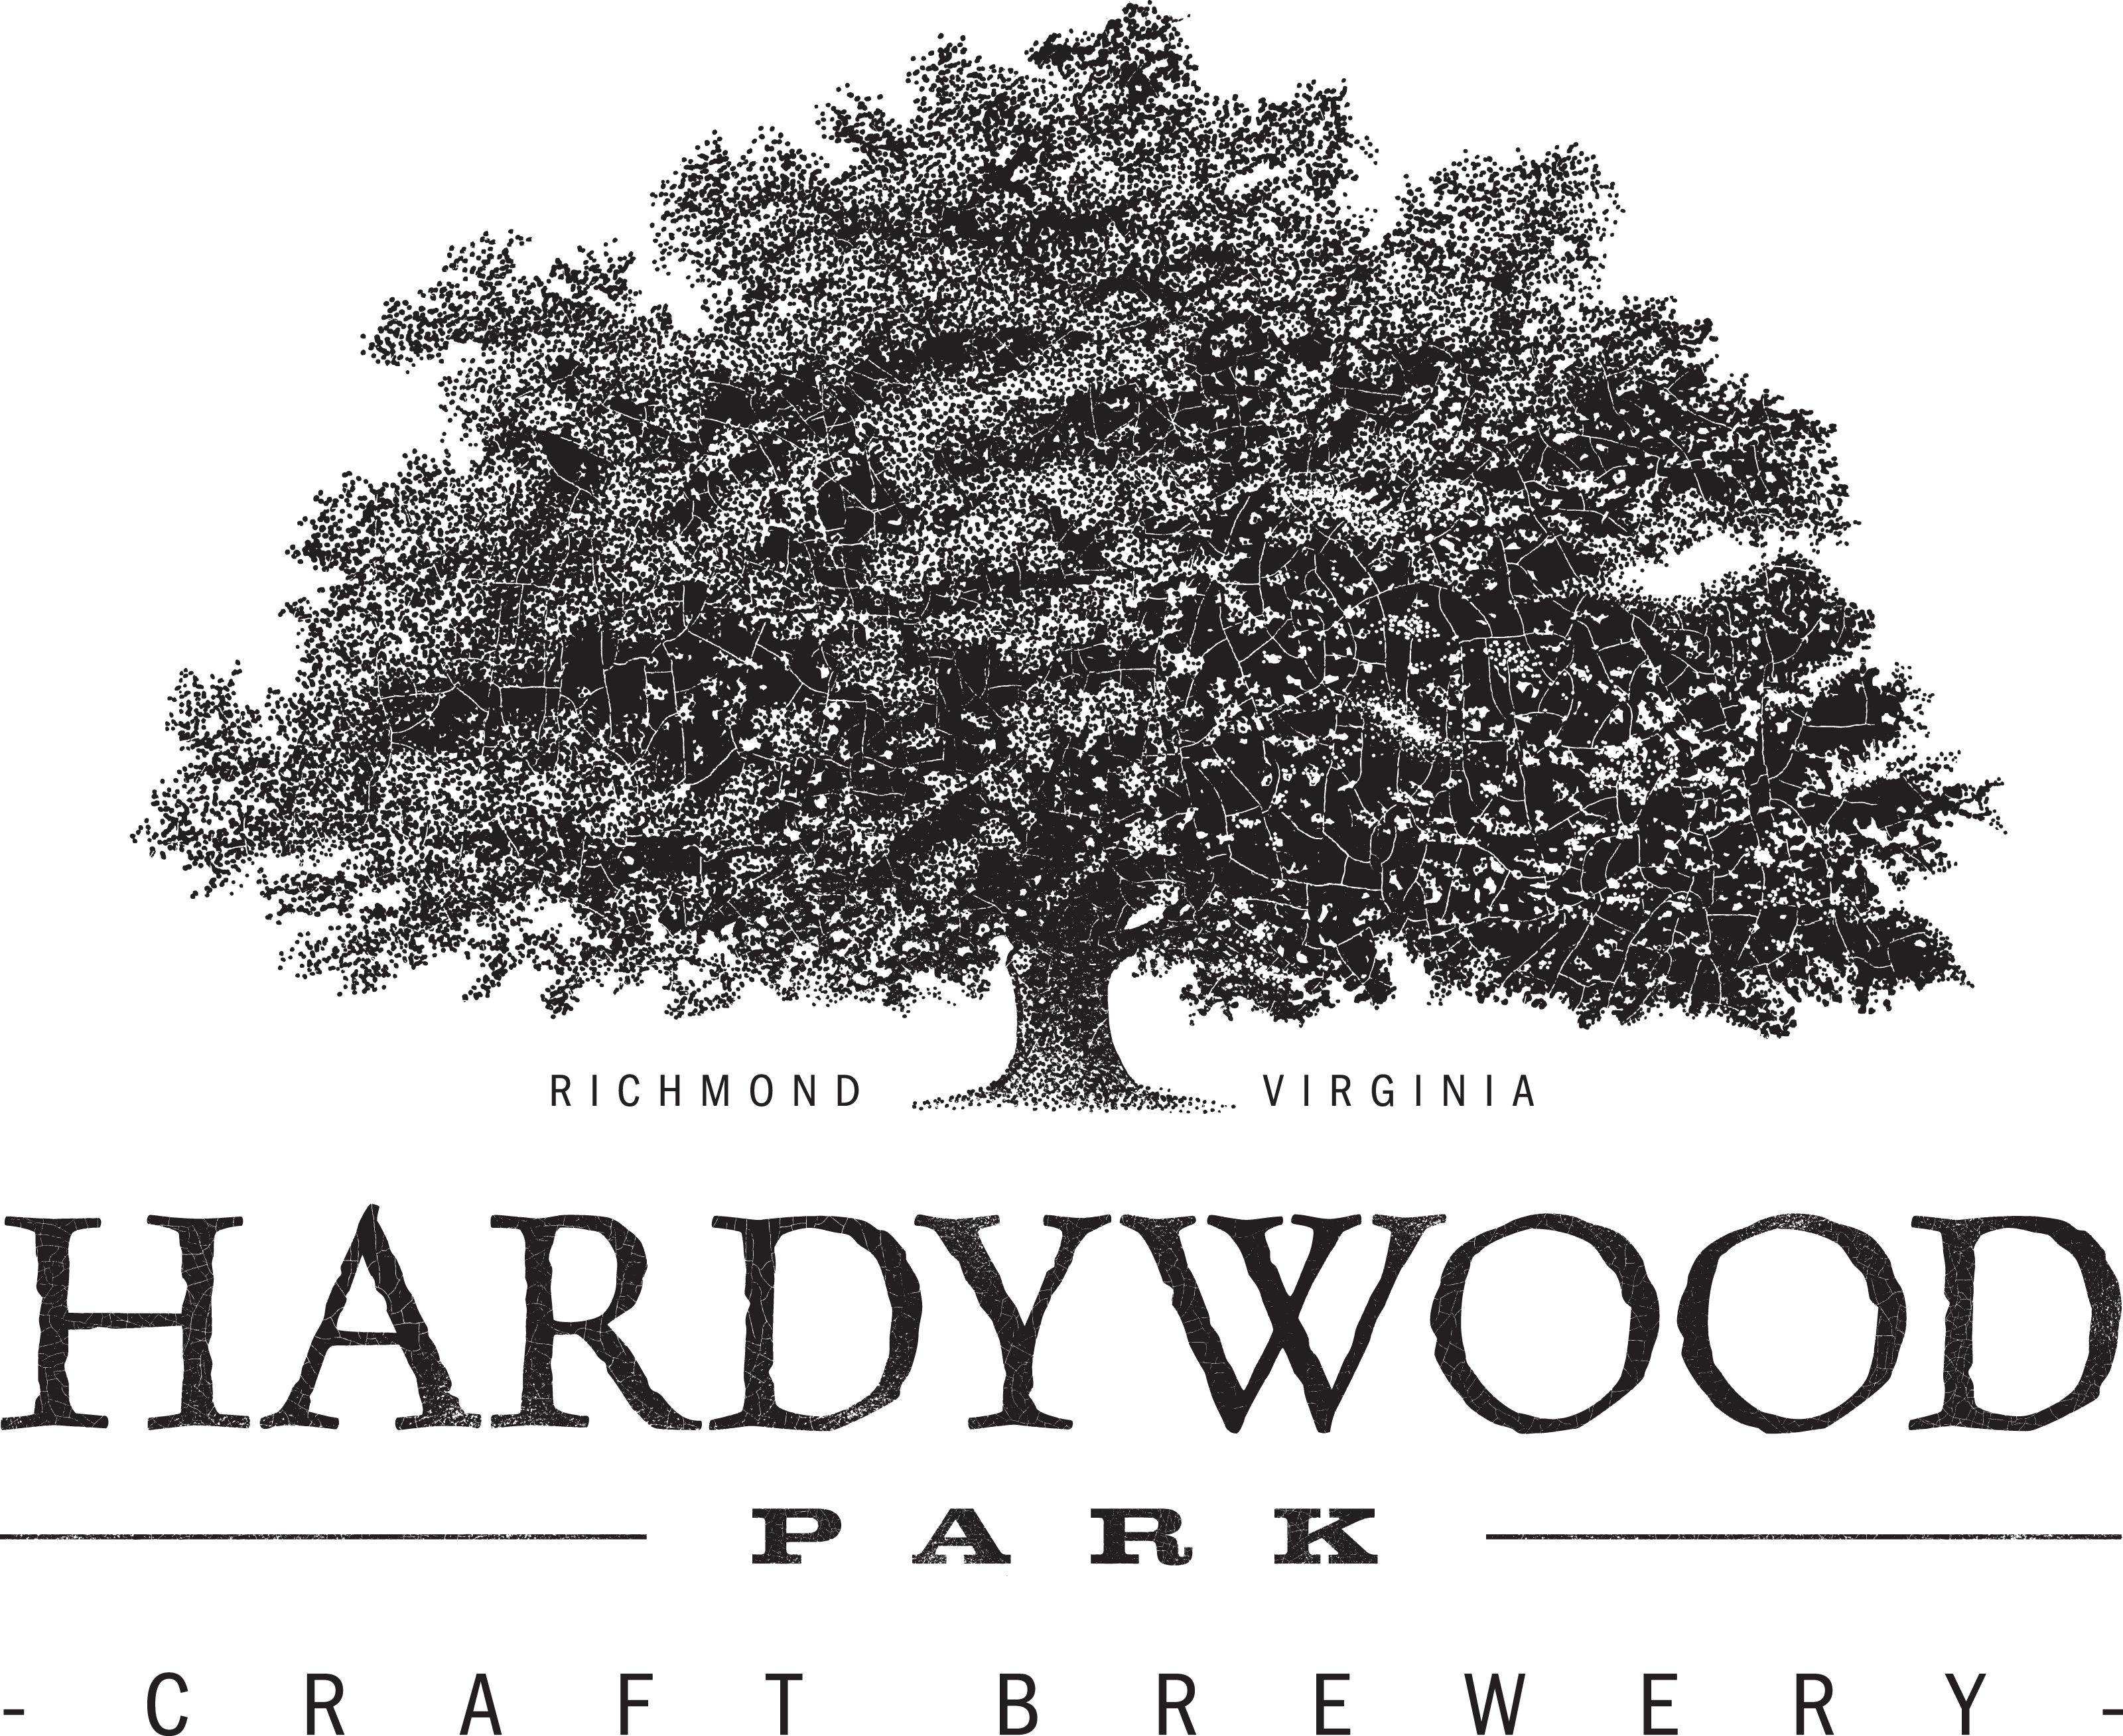 Image for Special Announcement:  Hardywood Park Craft Brewery & Virginia Tech Partnership